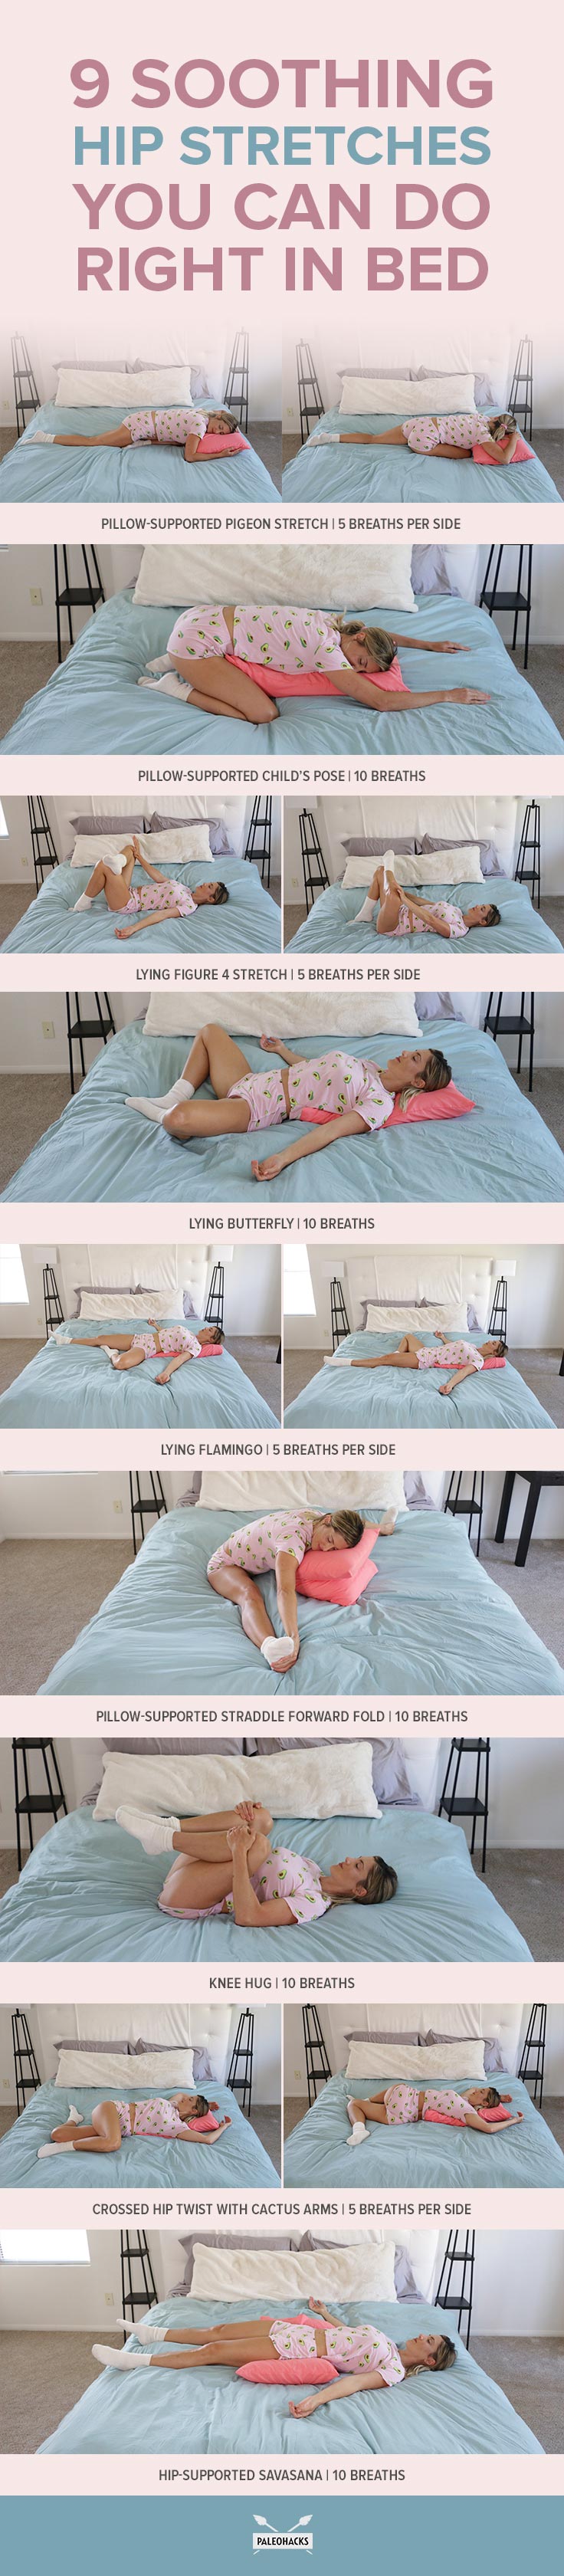 If you have a hard time sleeping because you can’t find a comfortable position, try this soothing hip stretch routine you can do right in bed.